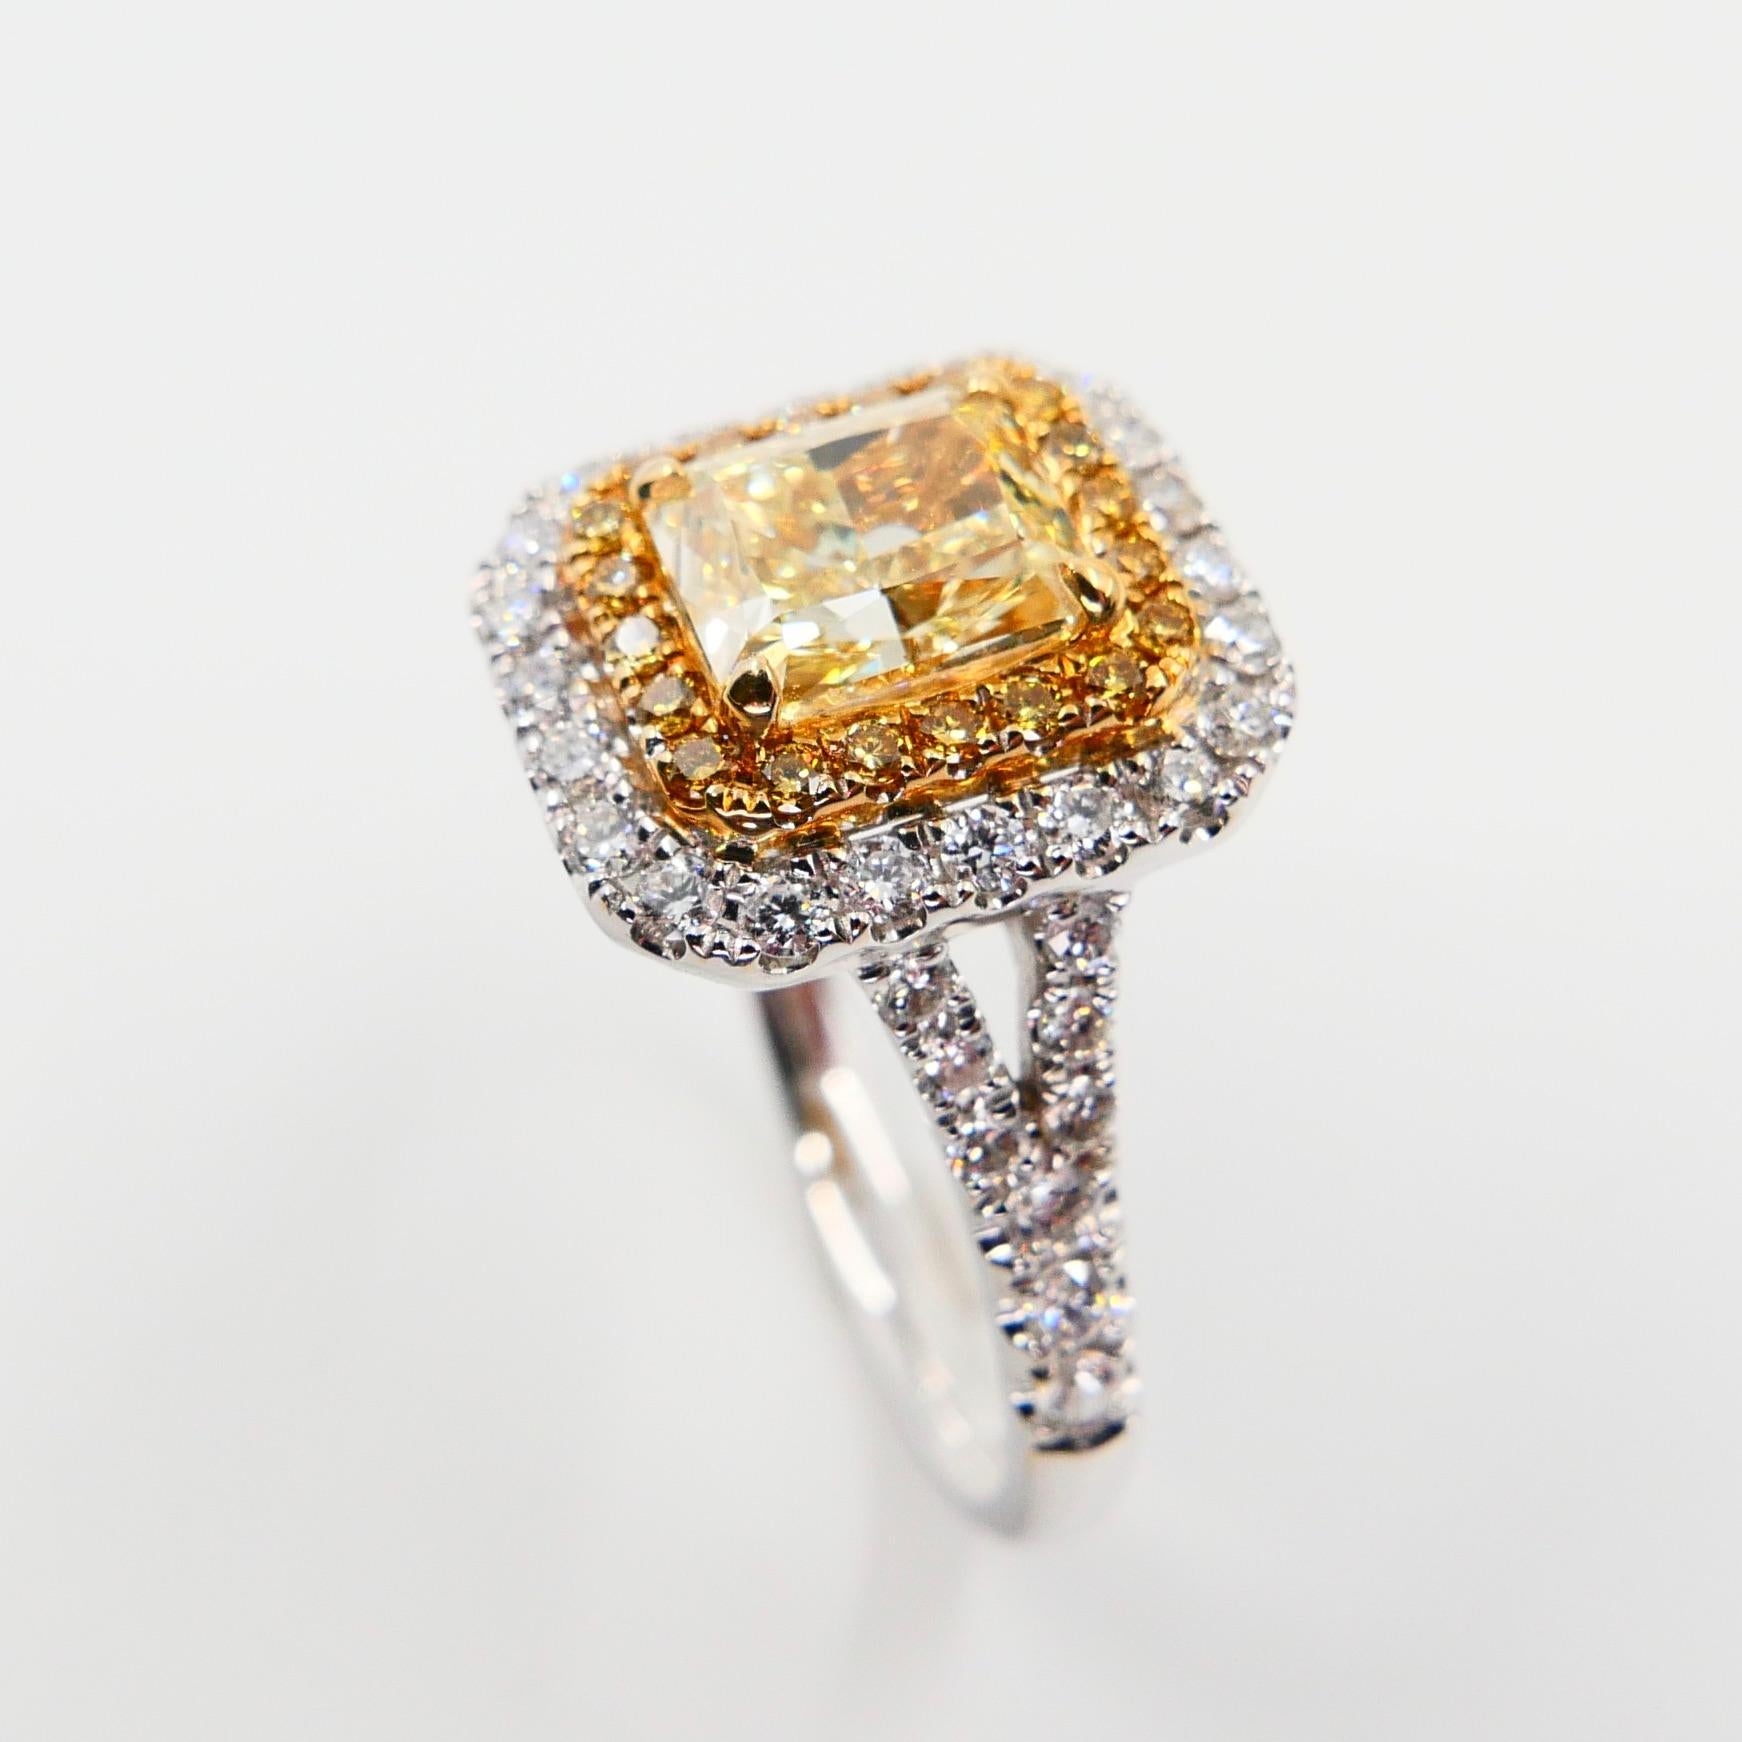 GIA Certified 1.06 Carat Cape Yellow Diamond Cocktail Ring, Double Halo Setting For Sale 1